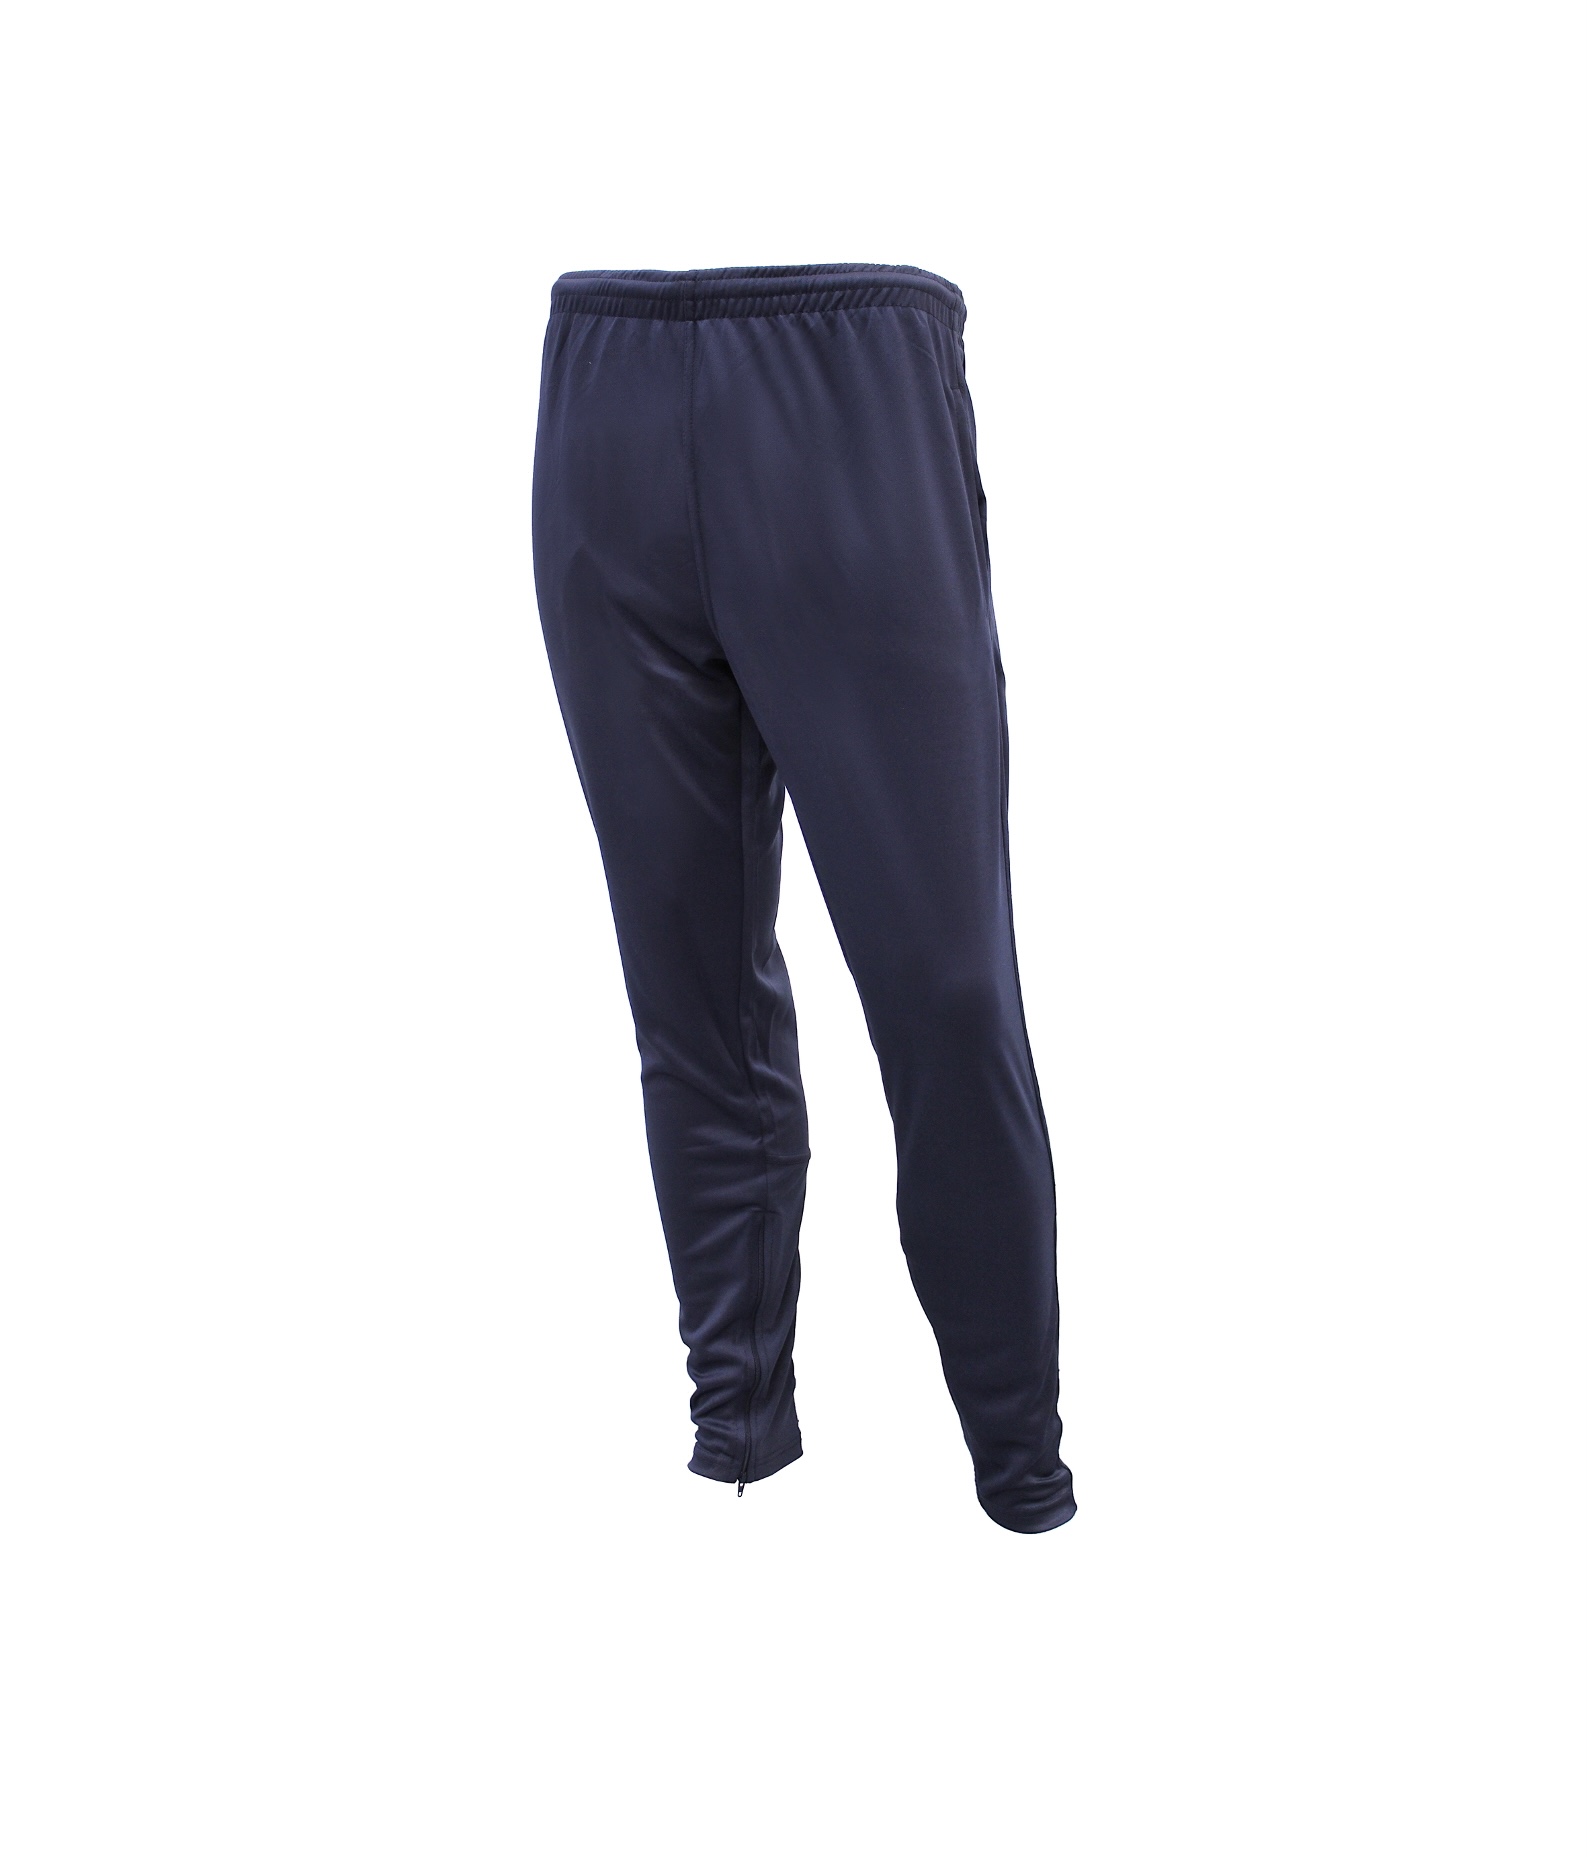 Adidas Navy Blue Track Pants, Men's Fashion, Bottoms, Joggers on Carousell